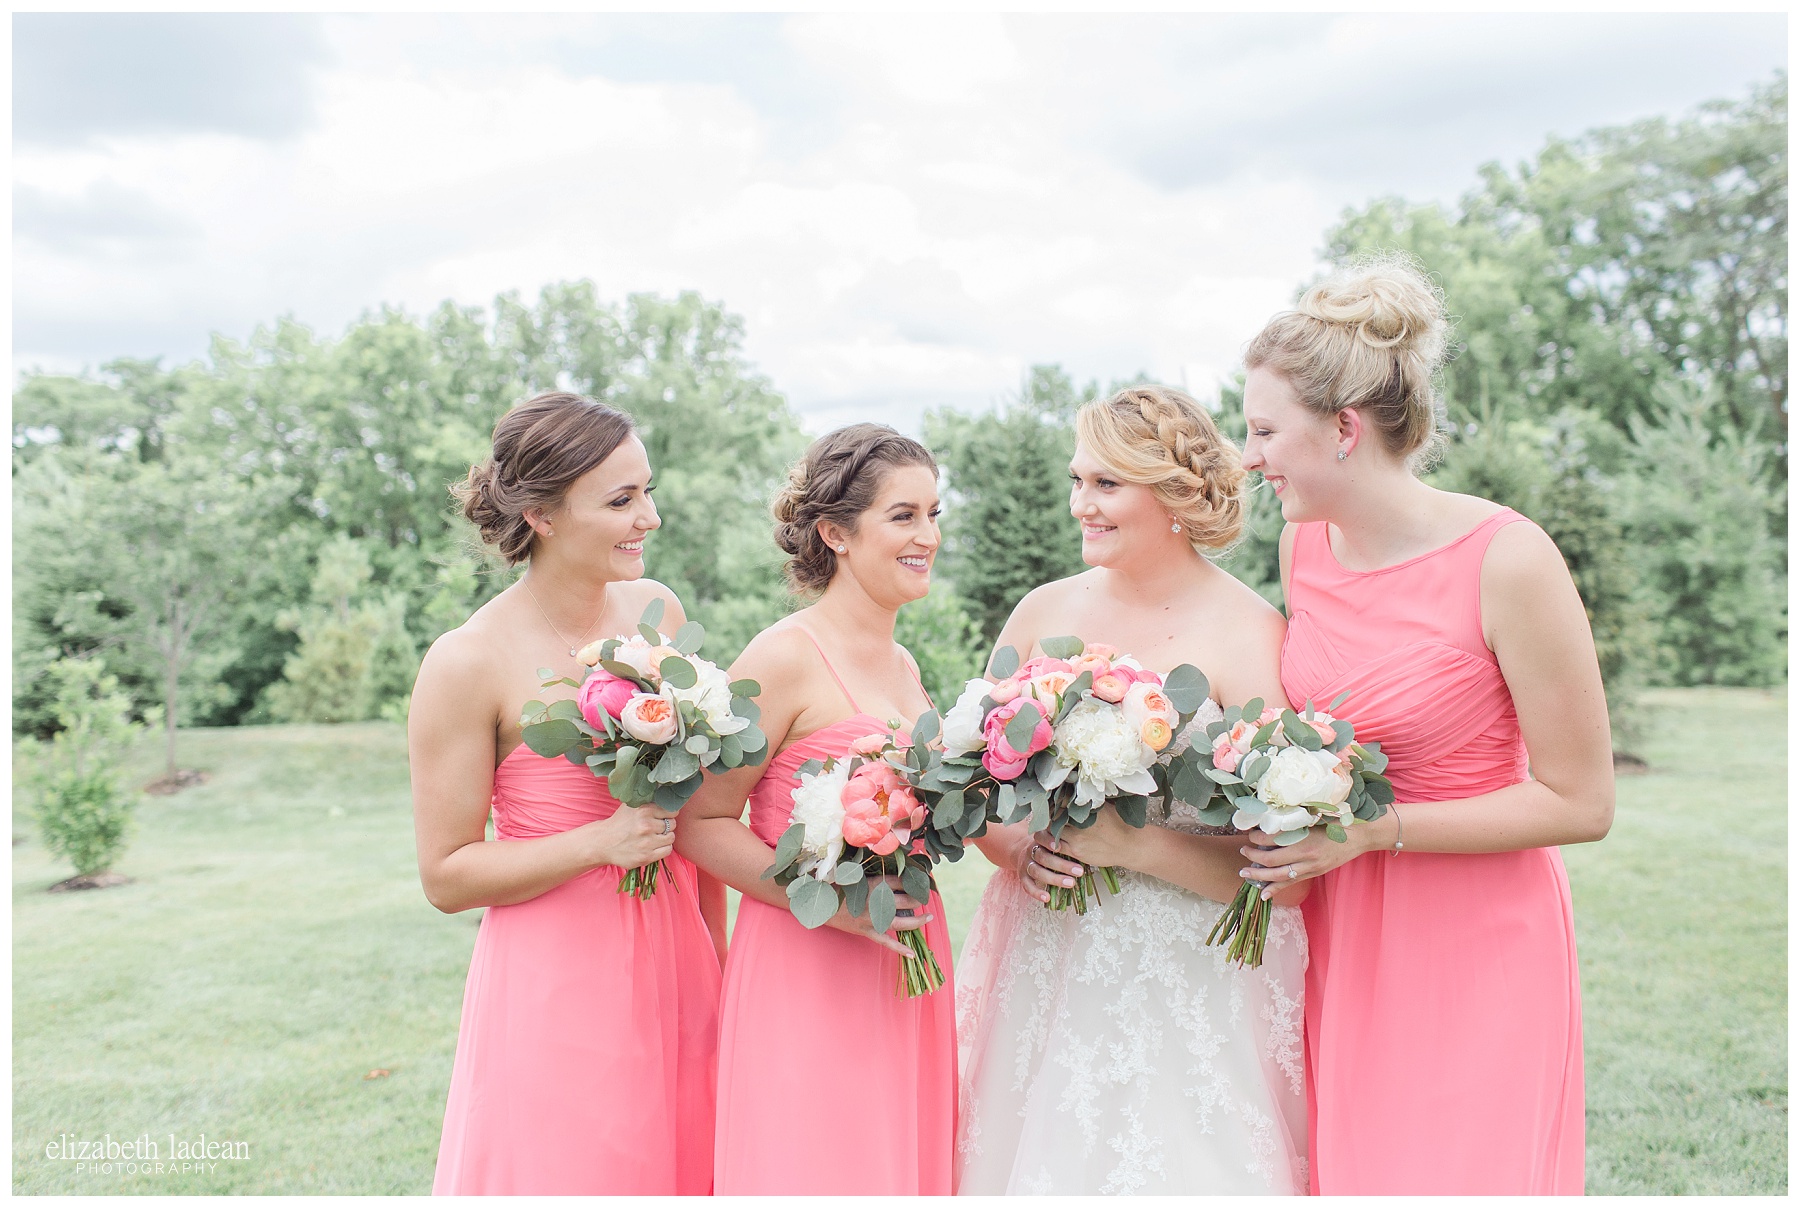 Coral colored bridesmaids dresses, 1890 event space